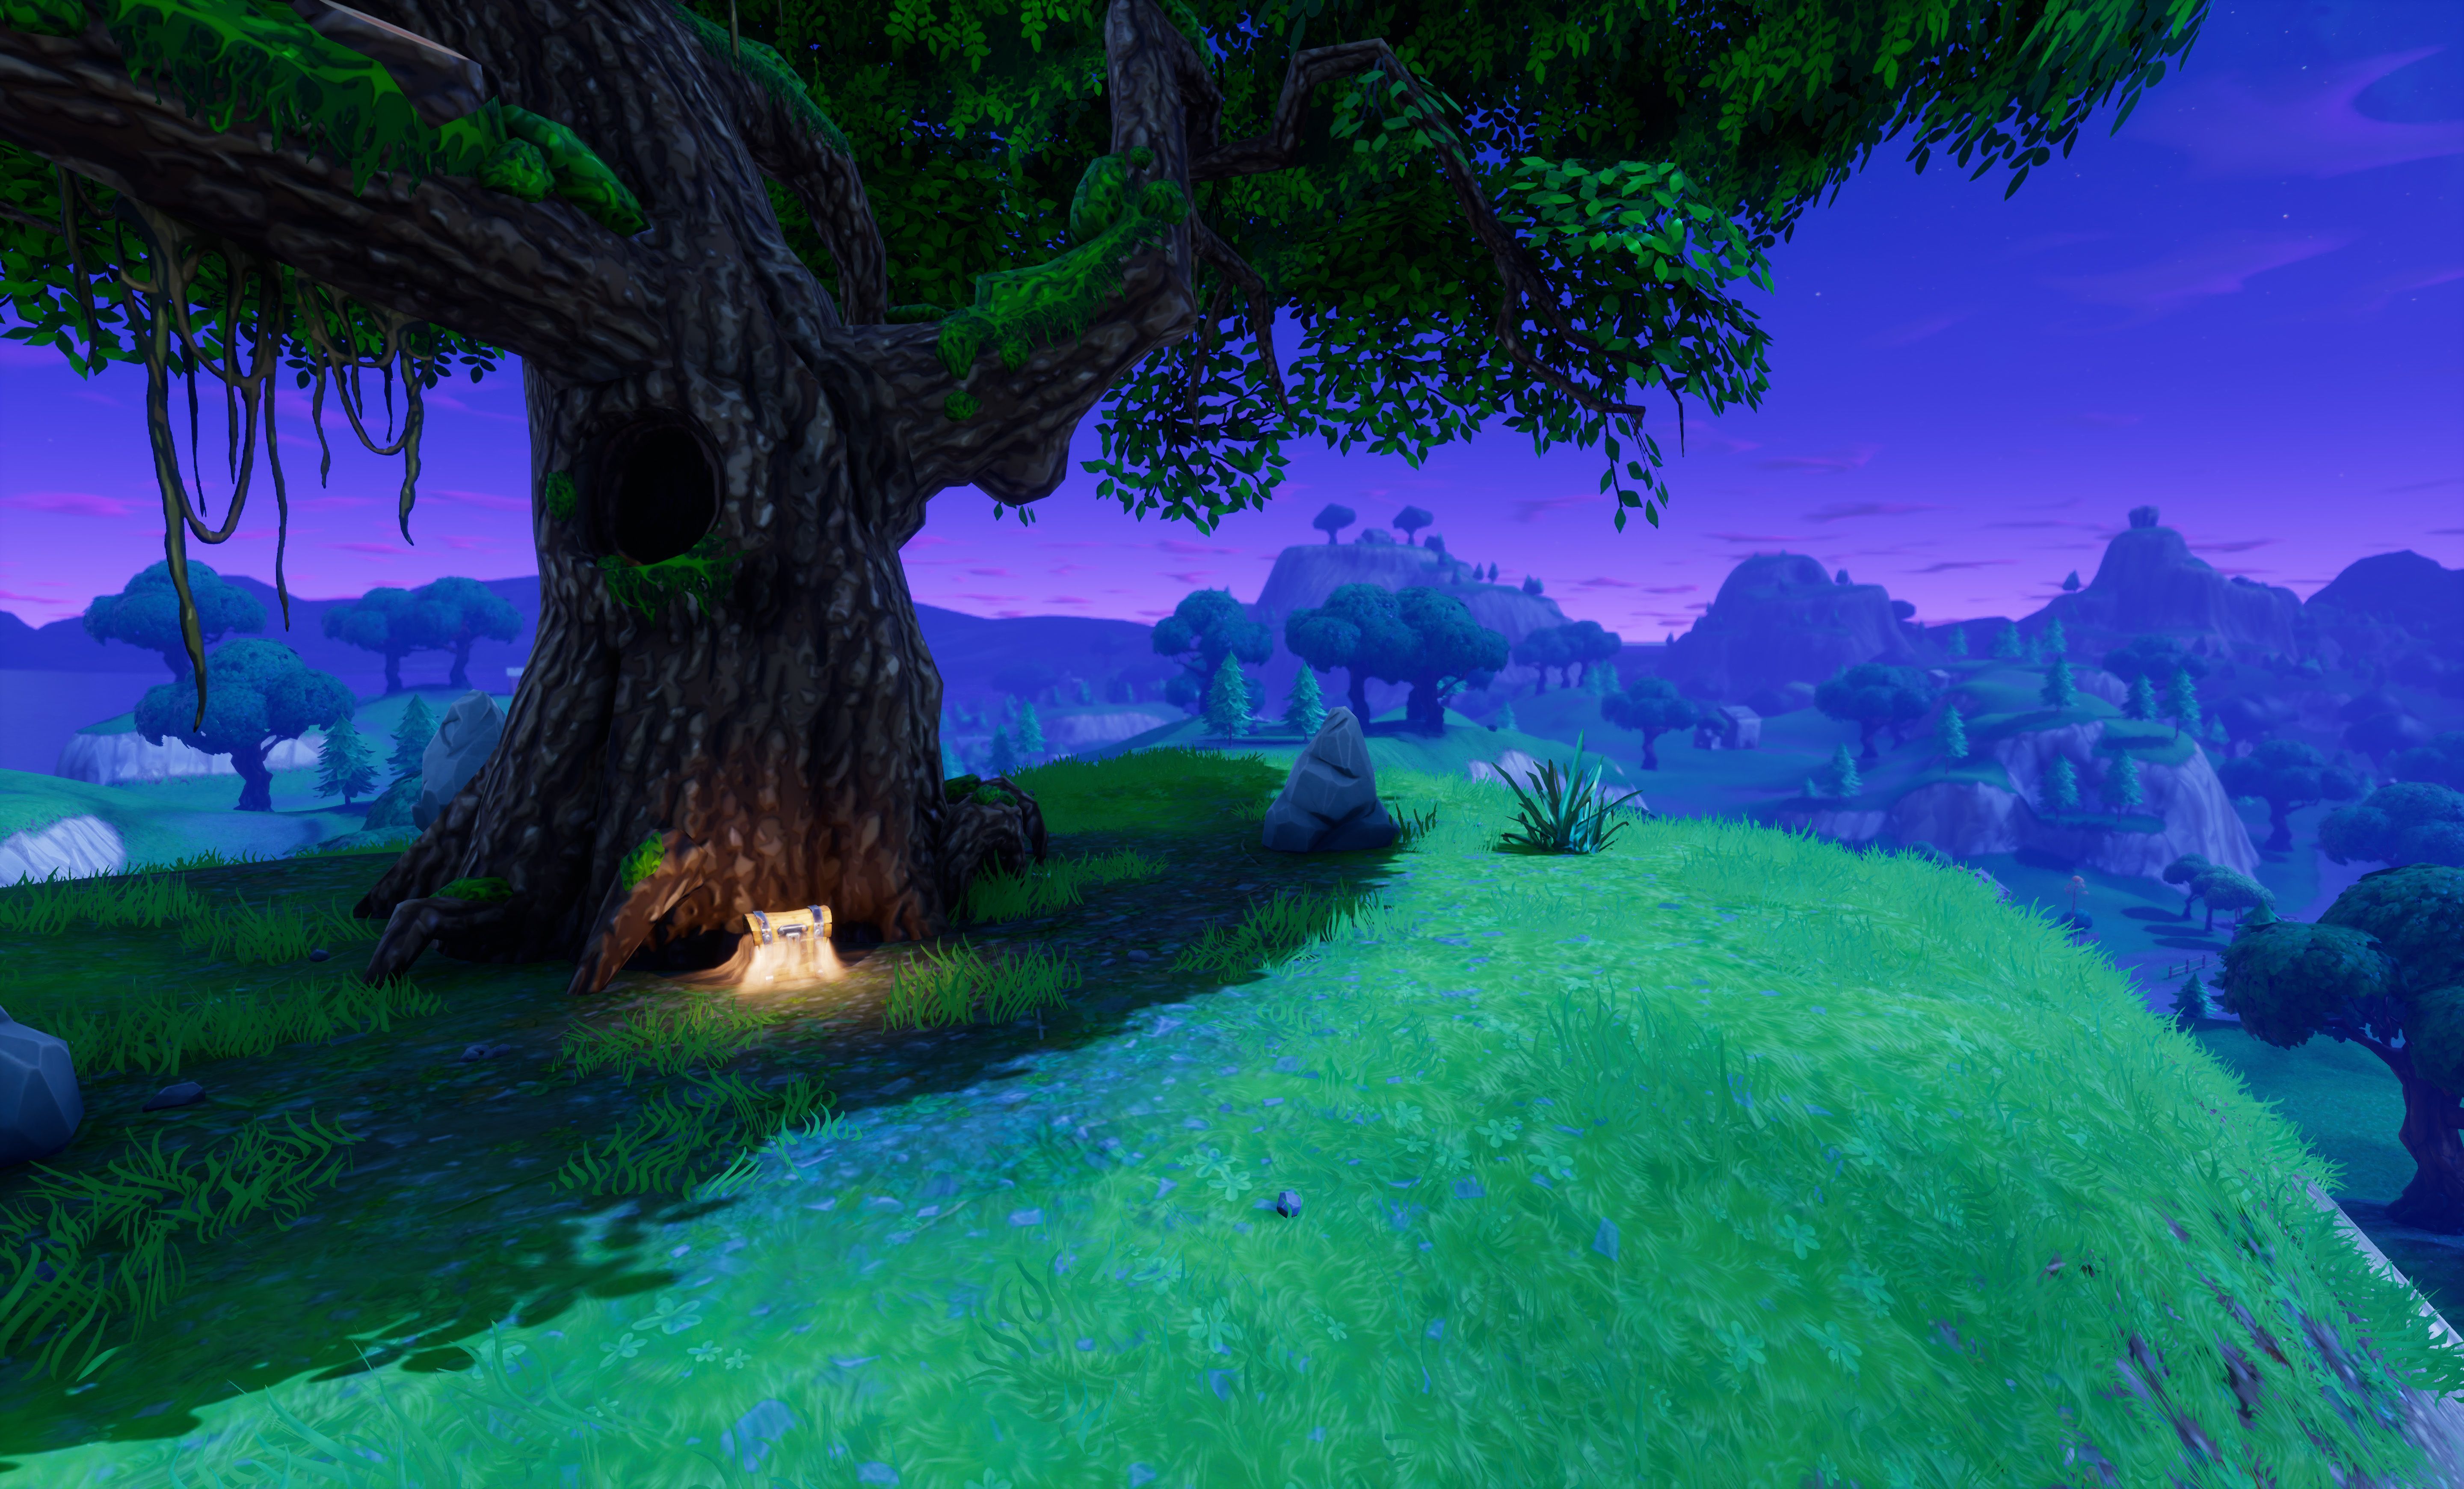 Background pictures of fortnite